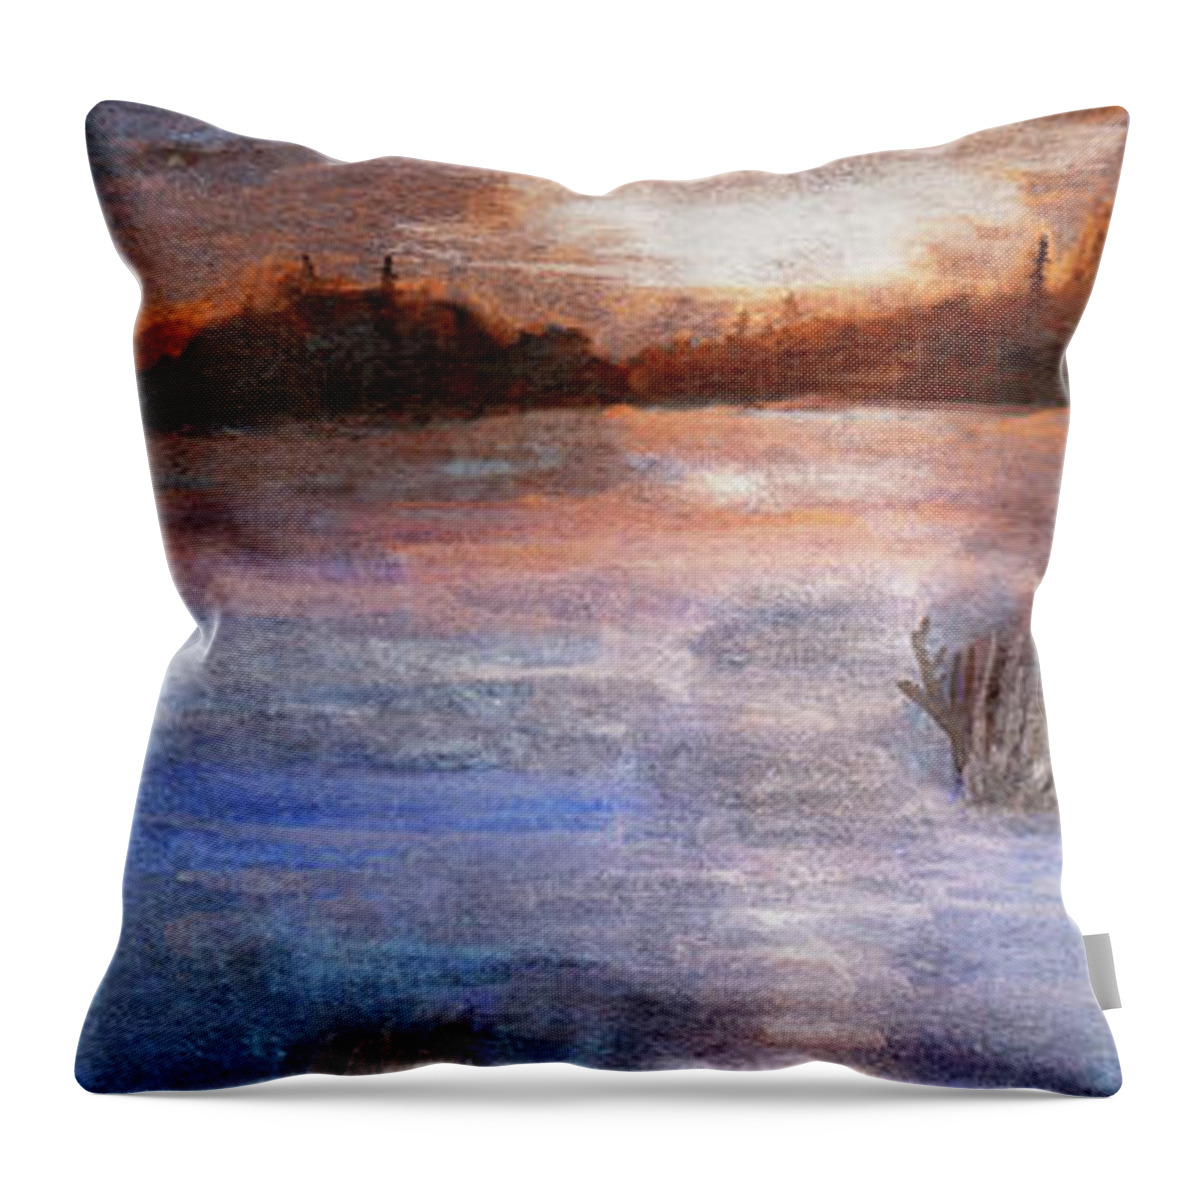 Sunset Winter Soft Ice Art River Water Frozen Painting Tree Trees Sky Sunrise Beautiful Scenery Pink Cold Silhouette Purple Nature Lake Kyllo Frost Colors Scene Covered Artwork White Weather Watercolor Season Icy Clouds Cloud Beauty Wood Storm Softness Reflection Picture Inspired Impressions High Dusk Distant Decor Color Cast Blue Bliss Black Wonderful Temperature Surface Sunlight Sun Painted Light January Inspiration Horizon Froze Evening Designer Decorating Day Dark Cool Colorful Bright Throw Pillow featuring the painting Soft Winter Sunset by R Kyllo